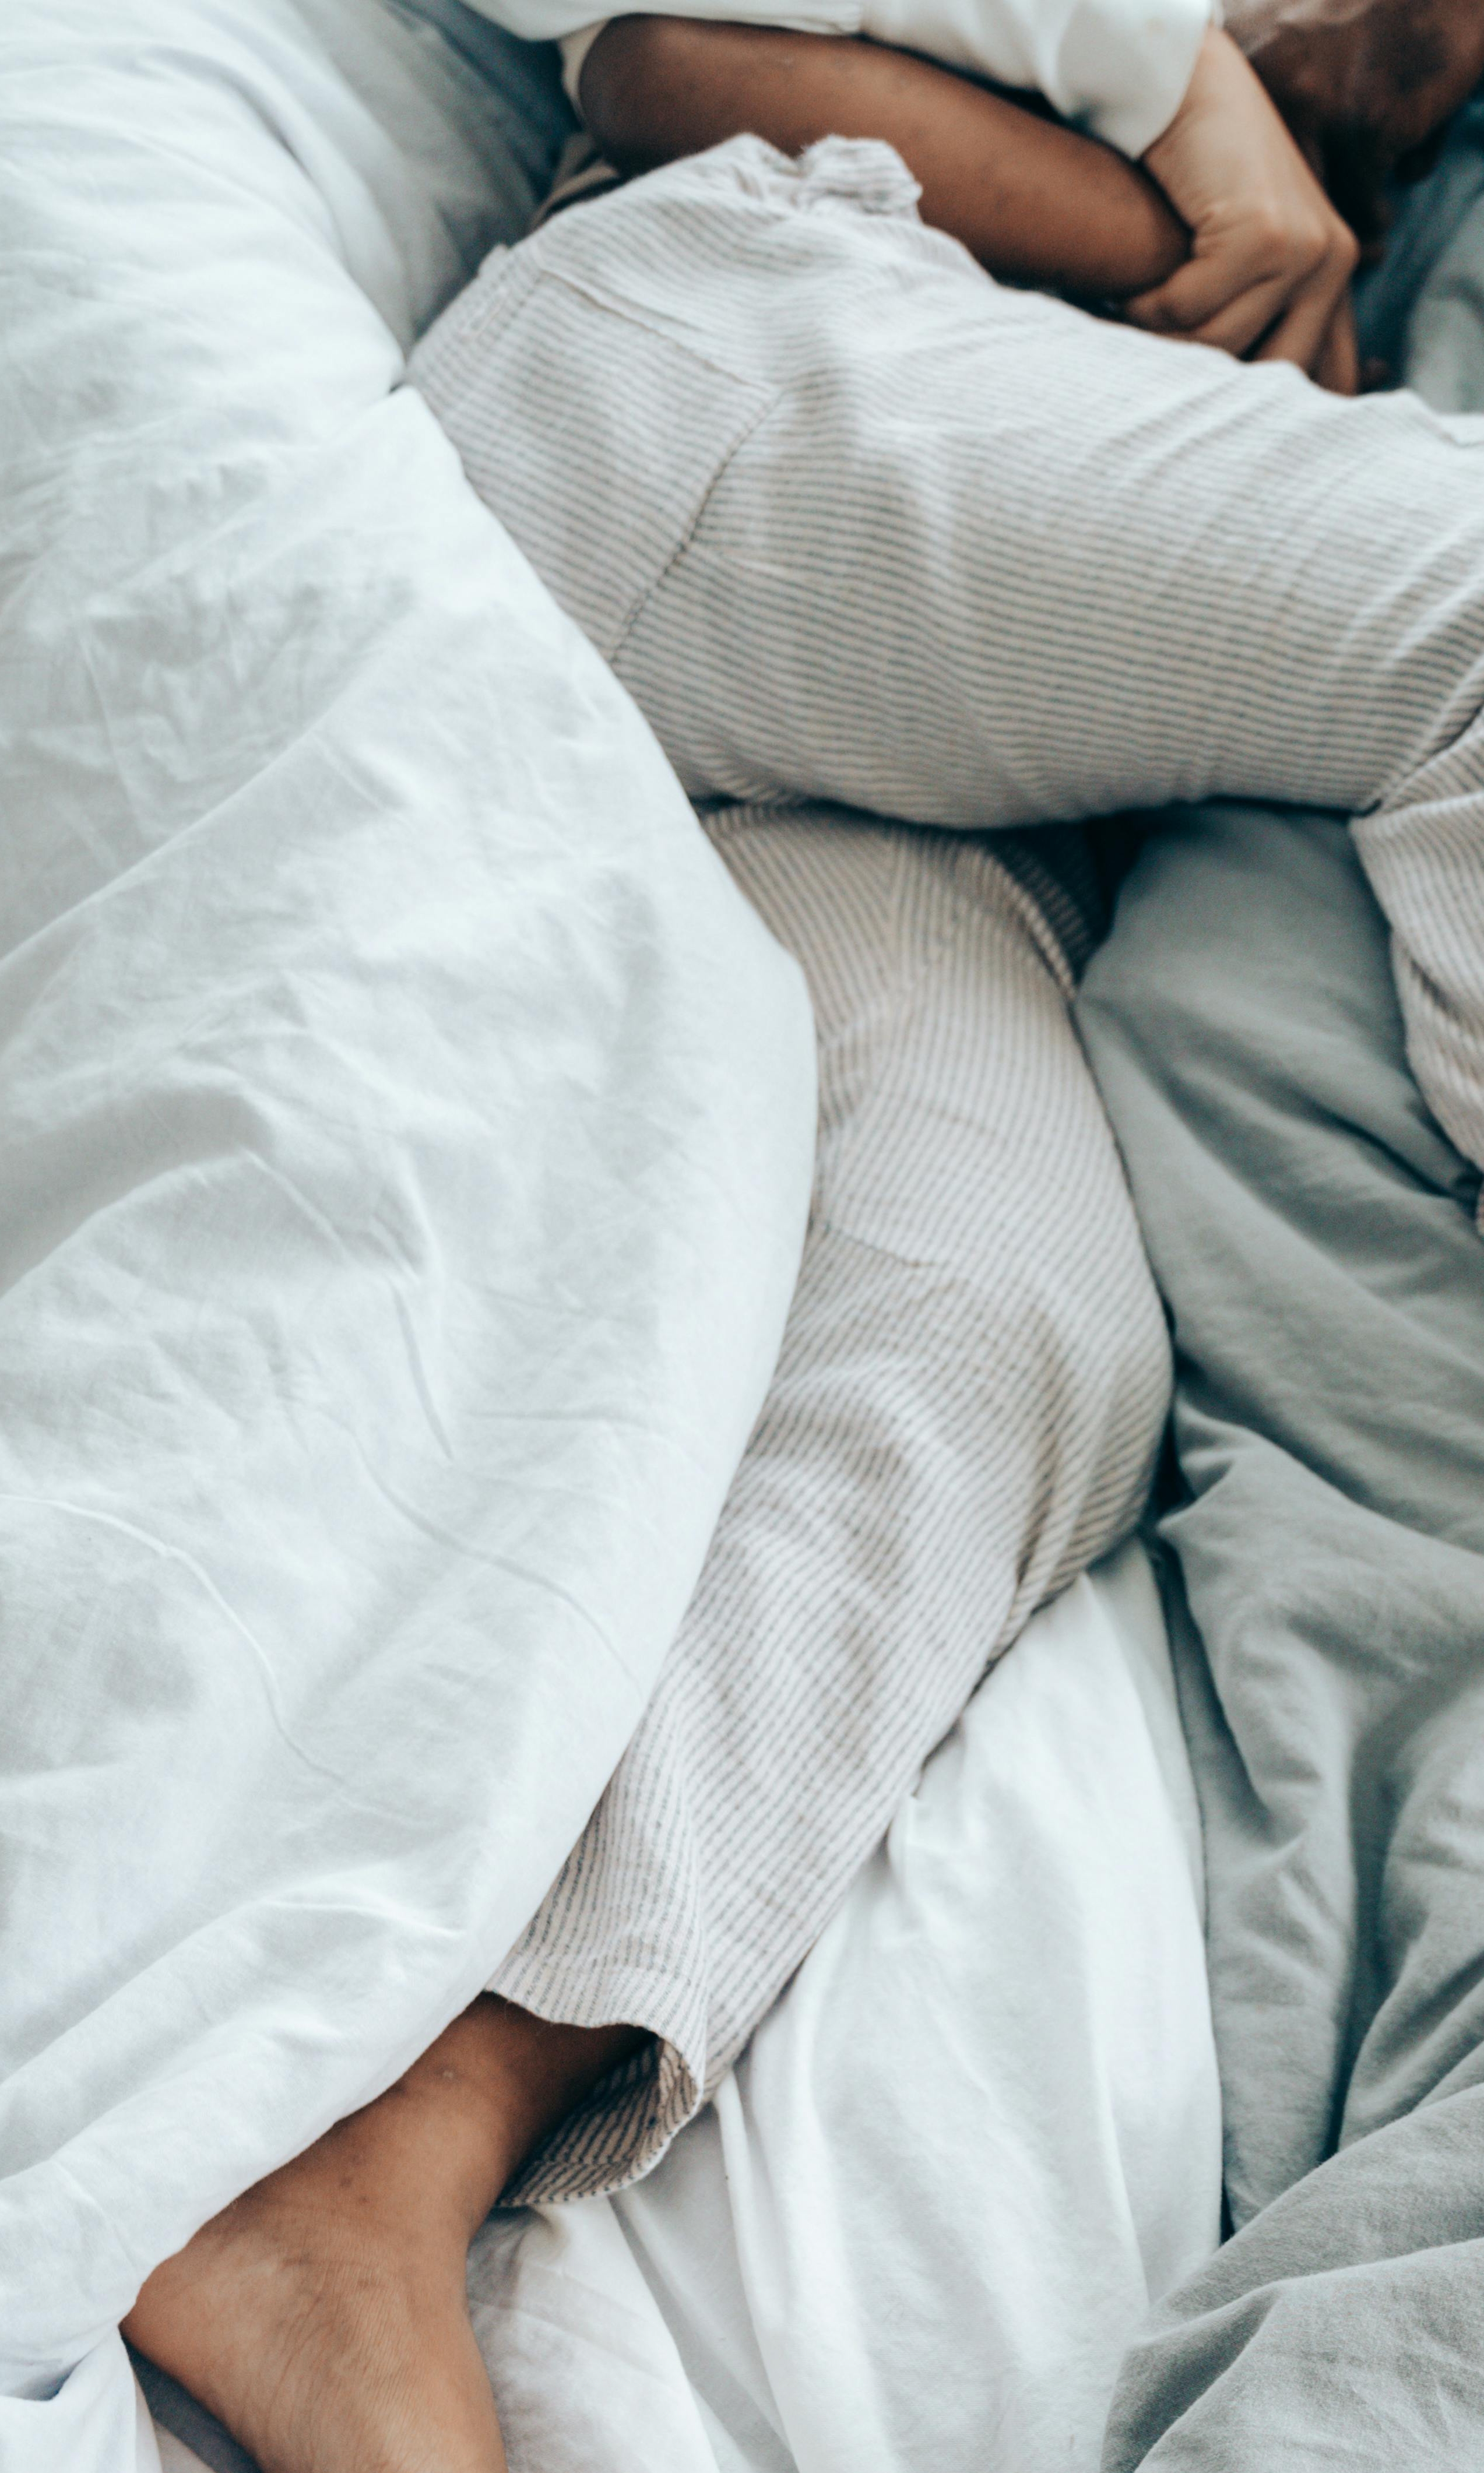 An adult and child together in bed | Source: Pexels